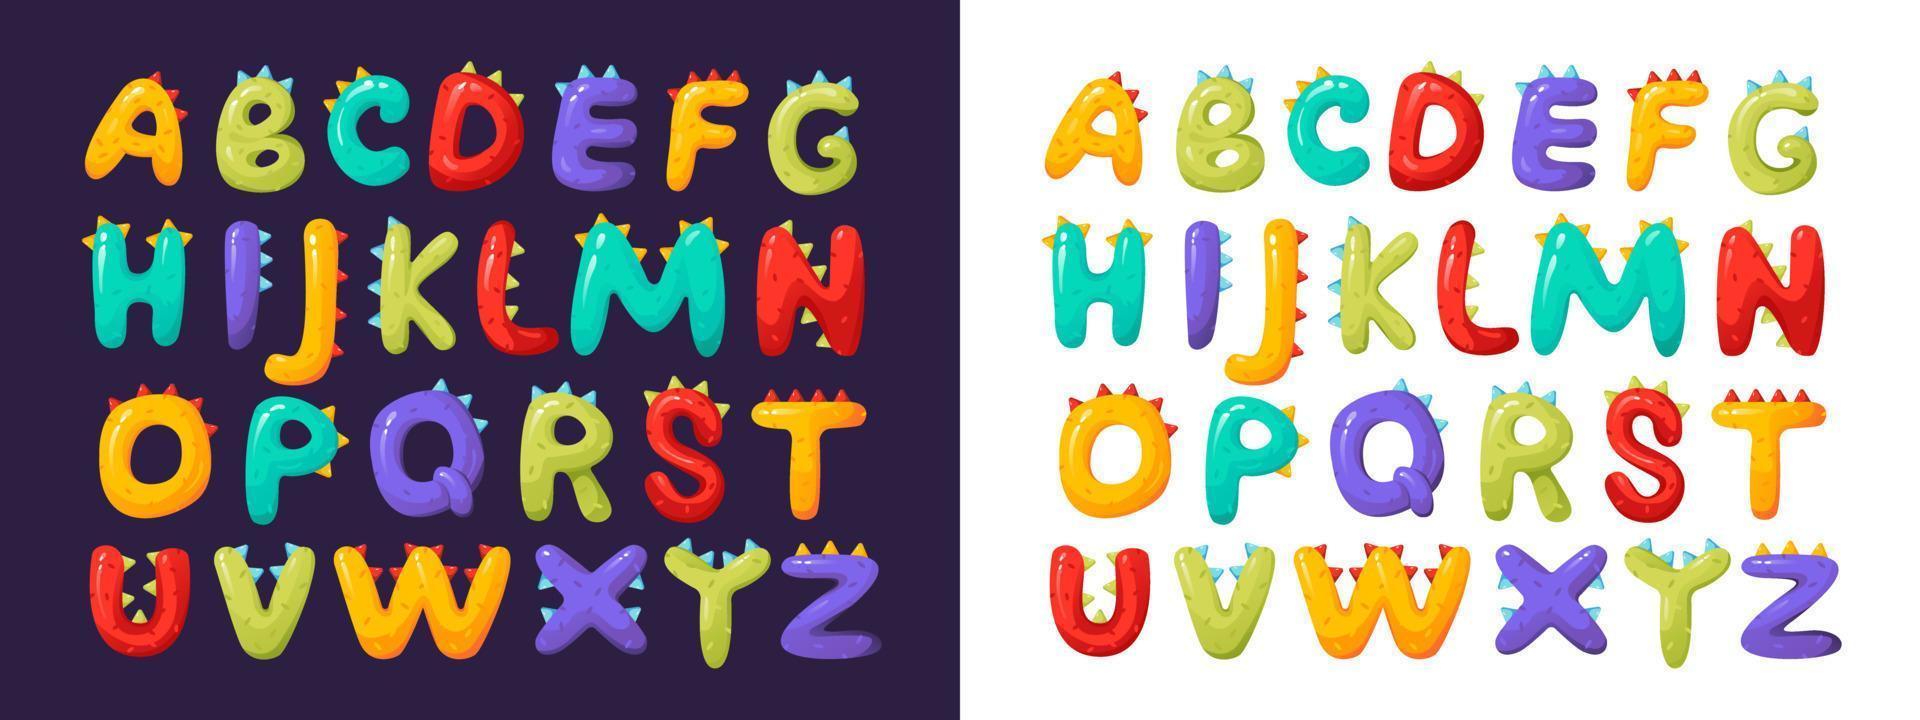 Children's alphabet, colorful and stylized font. Three-dimensional letters and numbers. Vector illustration